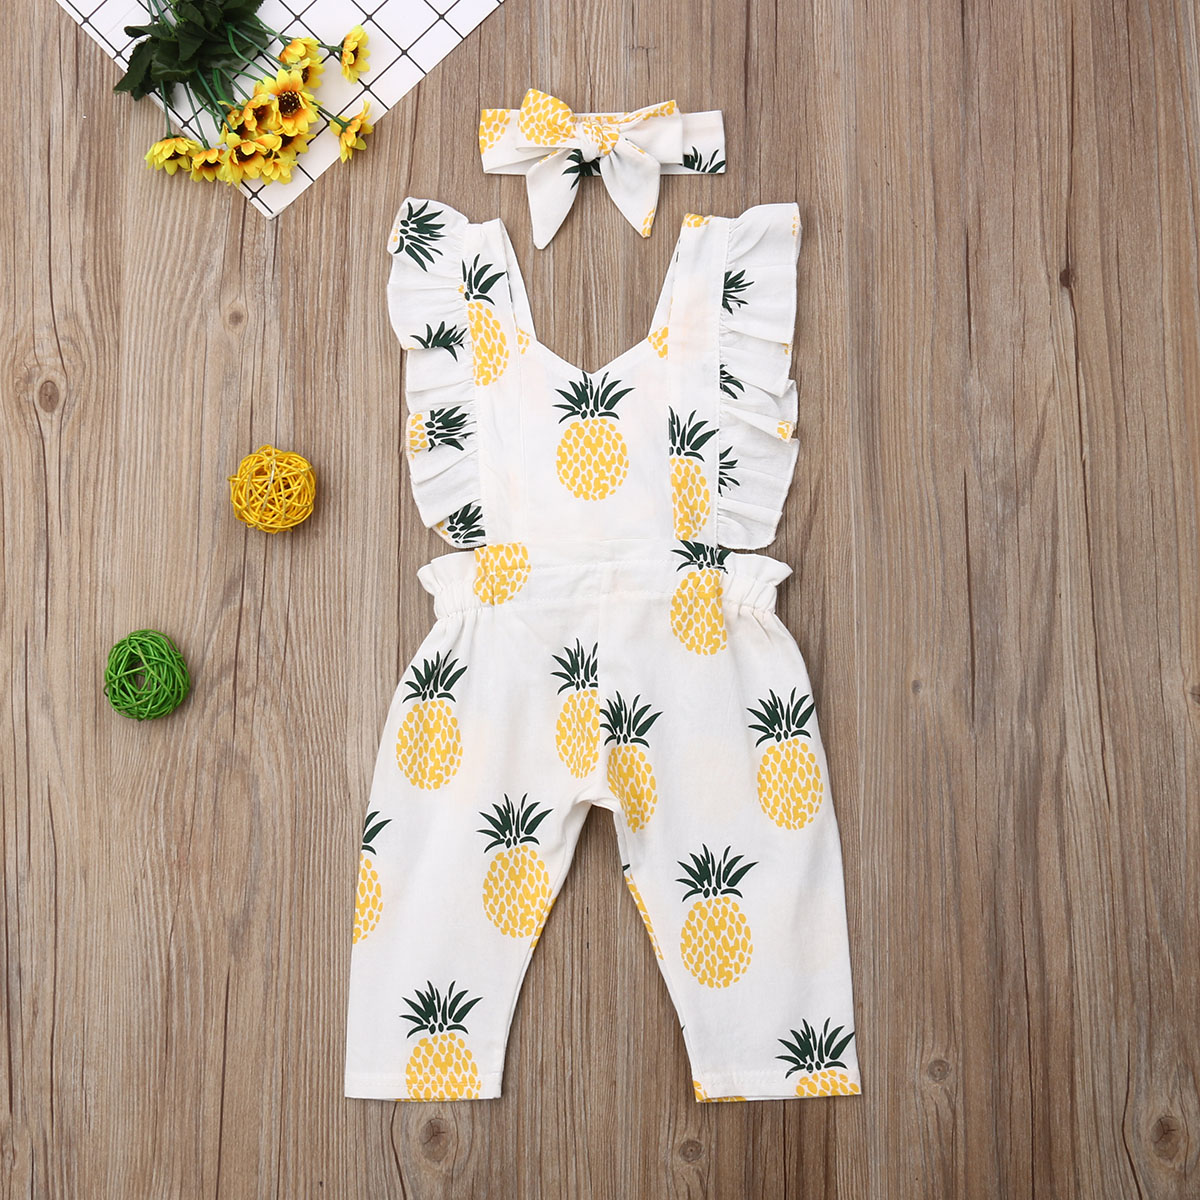 

Baby Girls Clothes Newborn Jumpsuits Toddler Sleeveless Ruffle Pineapple Printed Romper Headband Infant Outfits Clothing, As the picture